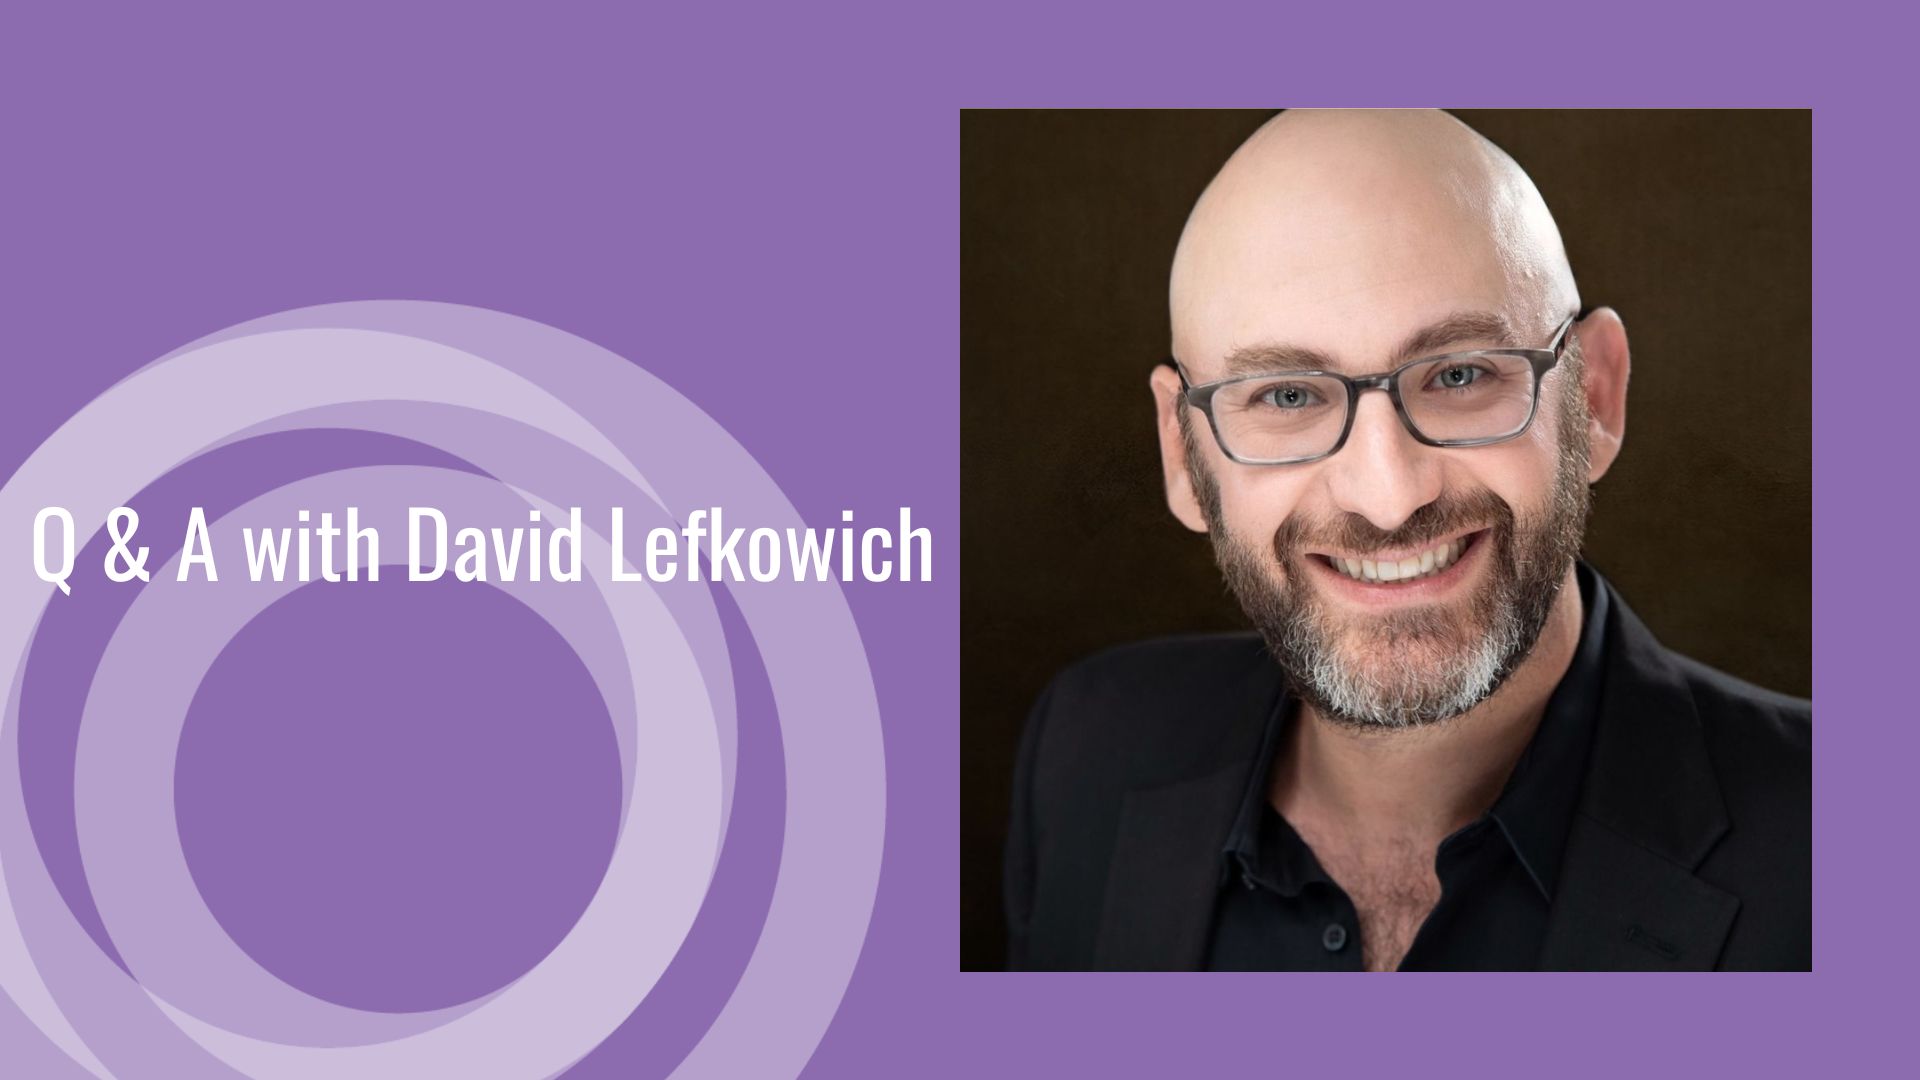 Q & A with David Lefkowich